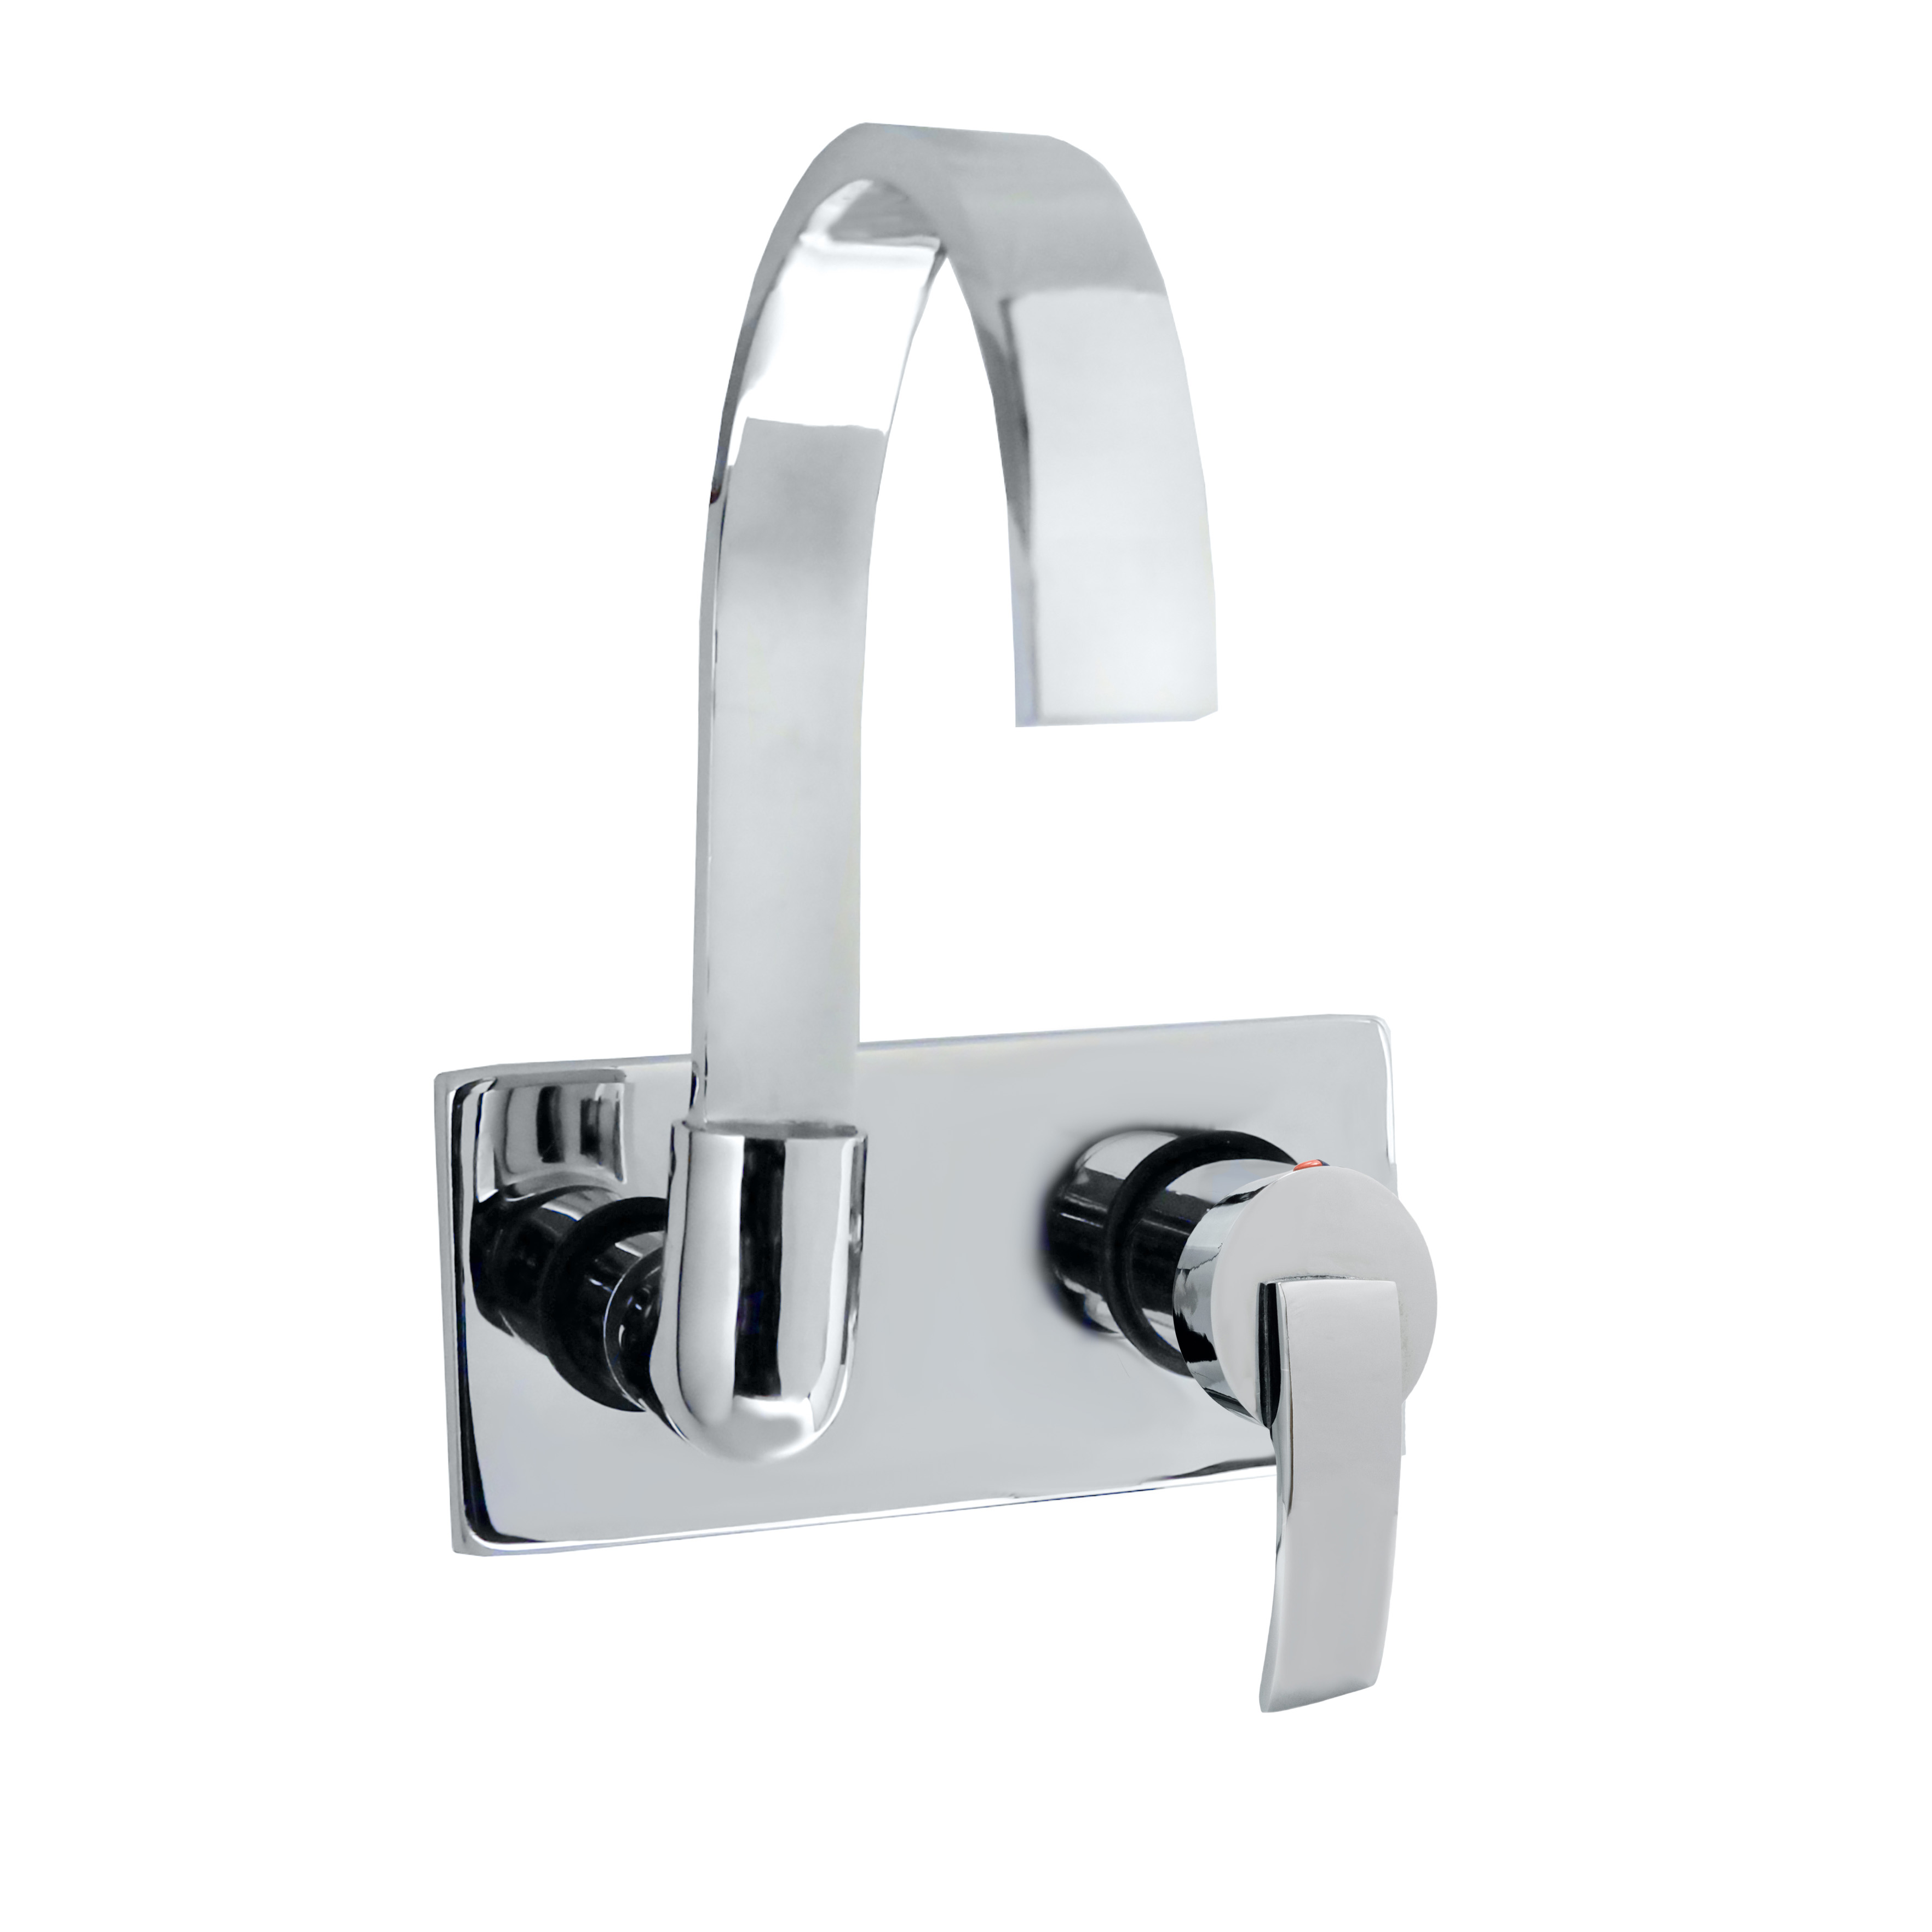 Allure Single Lever Sink Mixer Wall Mounted Exposed Part Kit